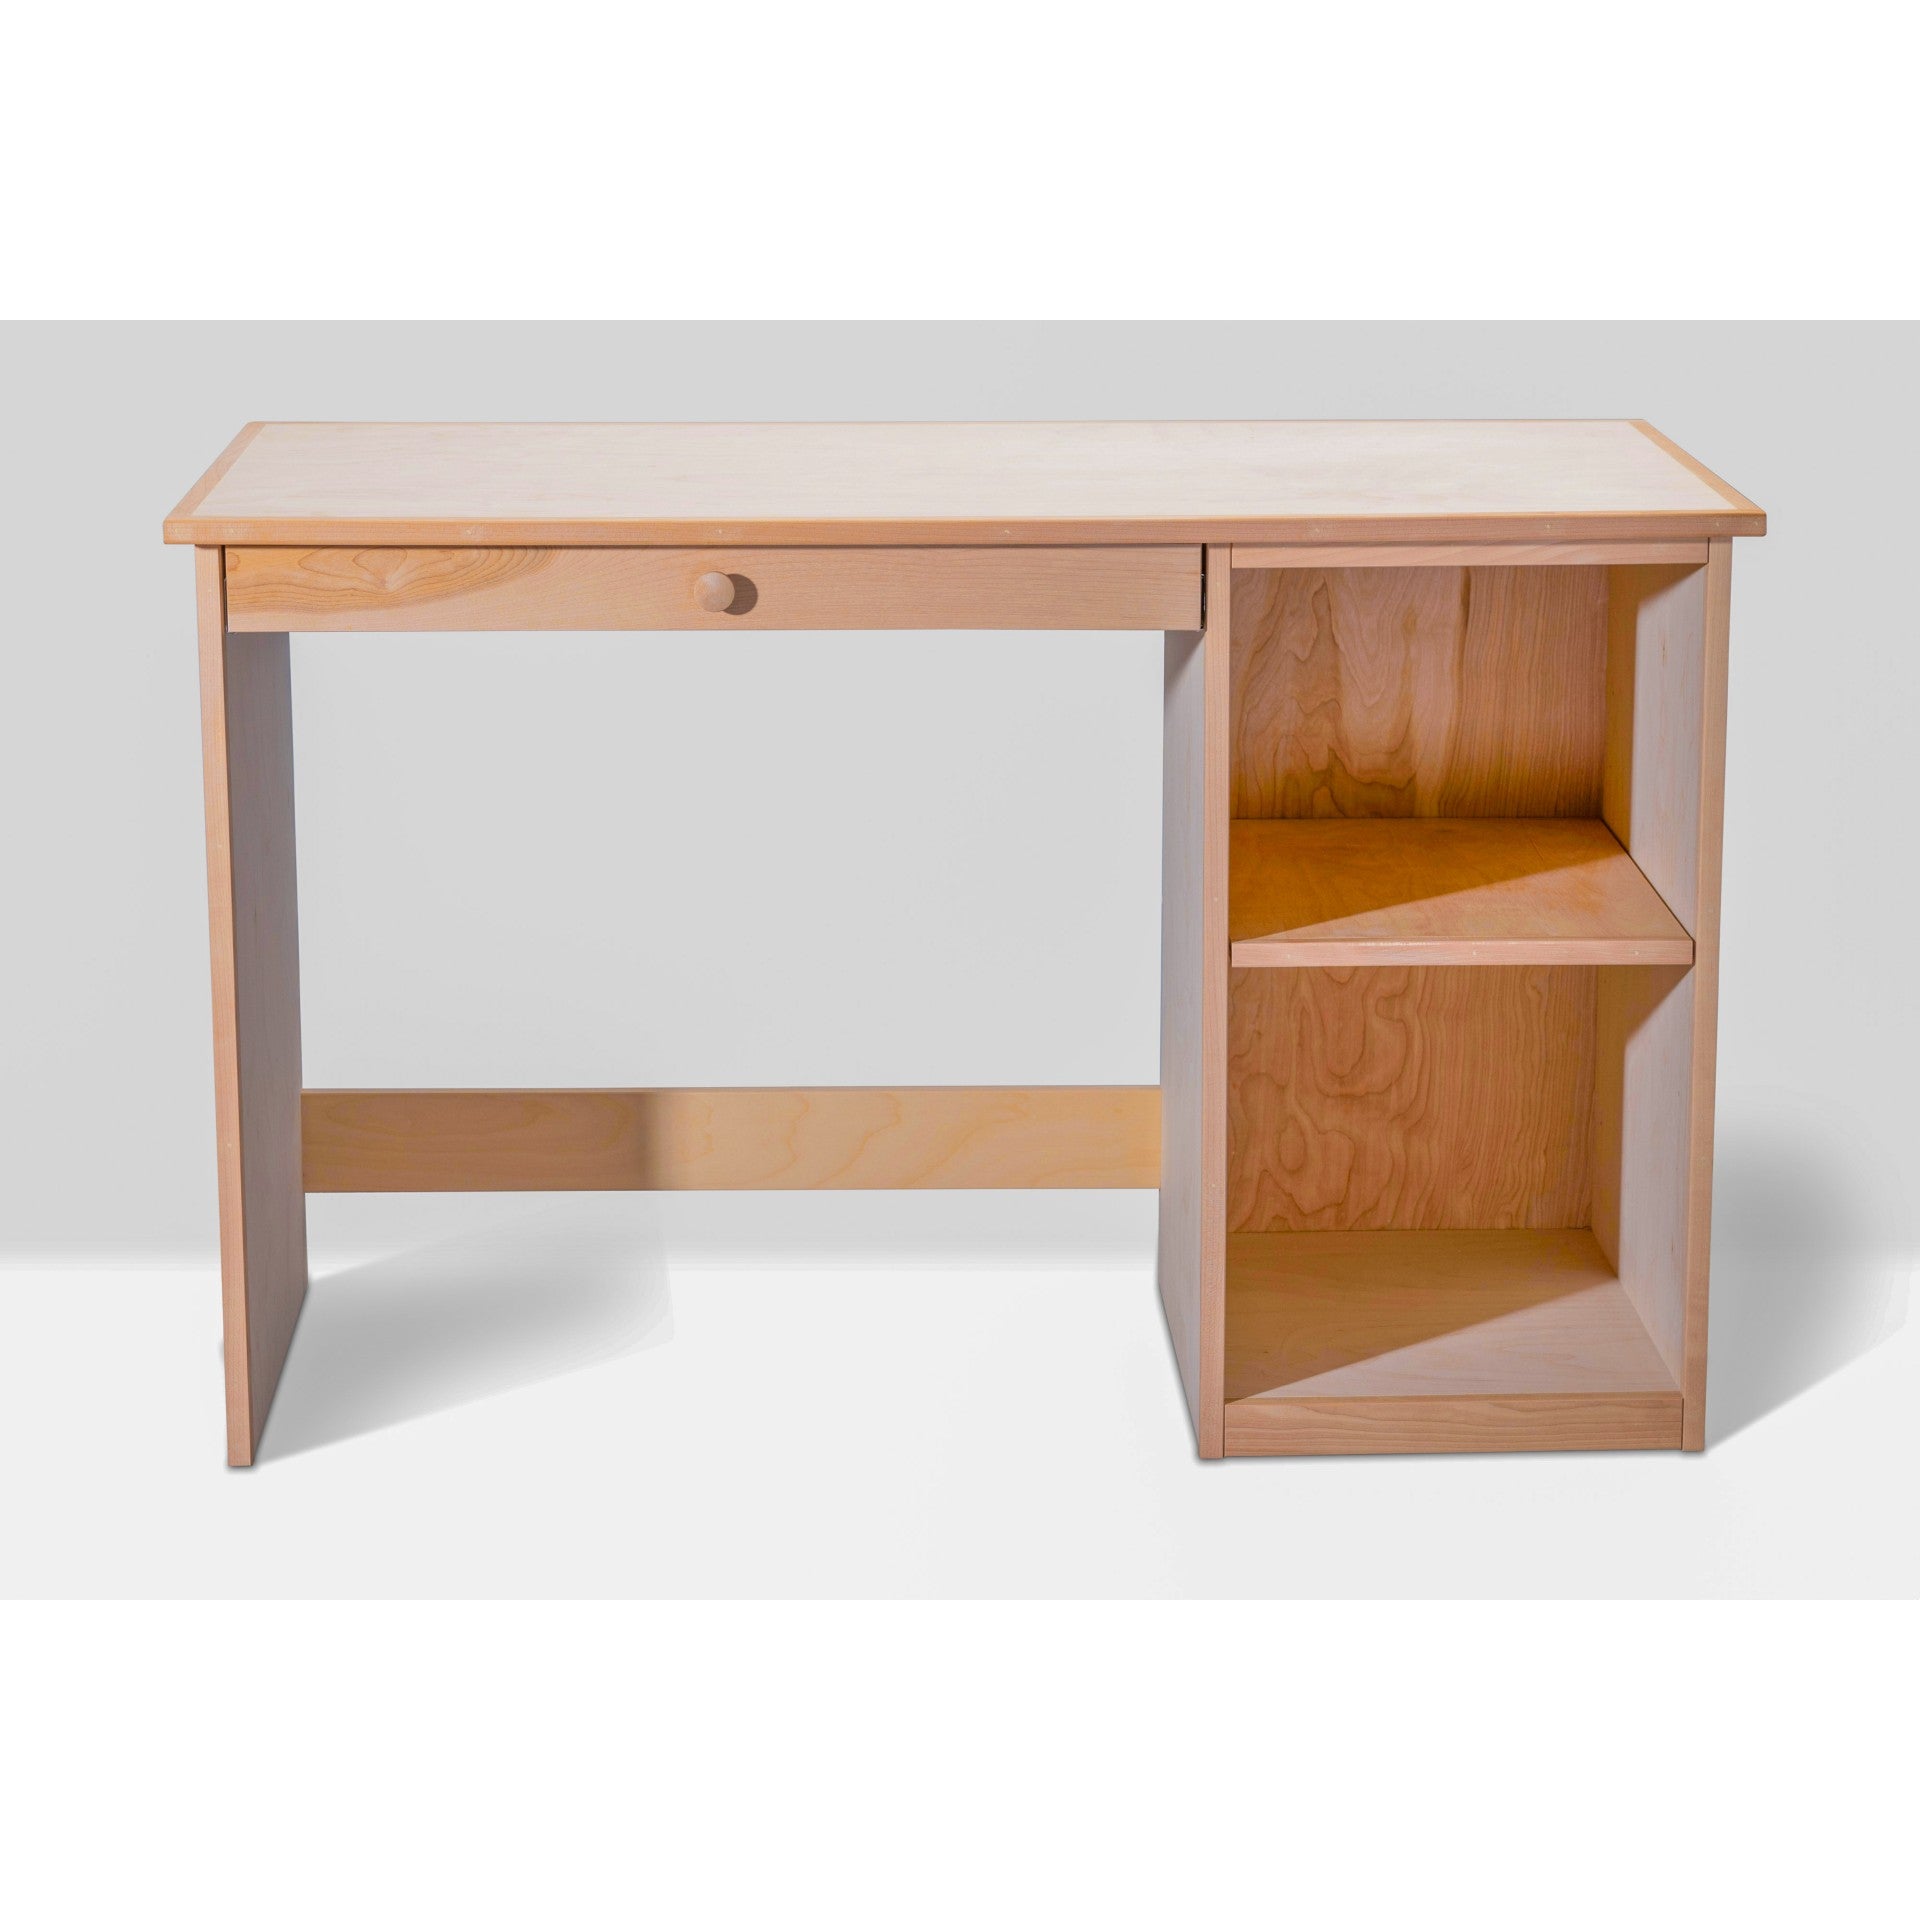 Berkshire Student Desk features adjustable shelving and a full extension drawer. Shown unfinished.